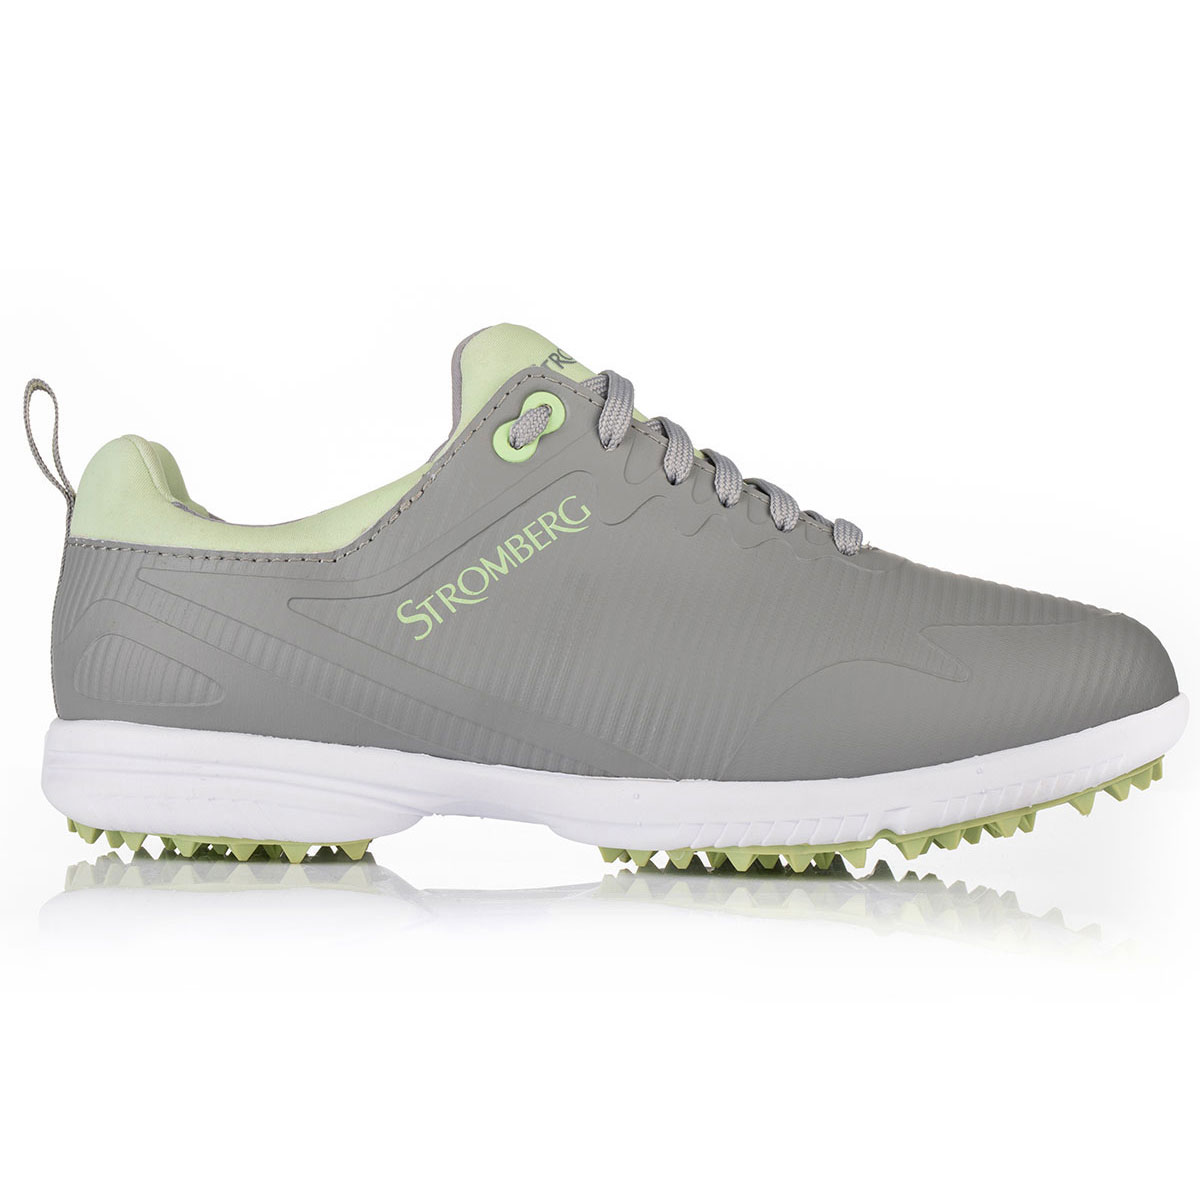 Stromberg Ladies Tempo Shoes from american golf